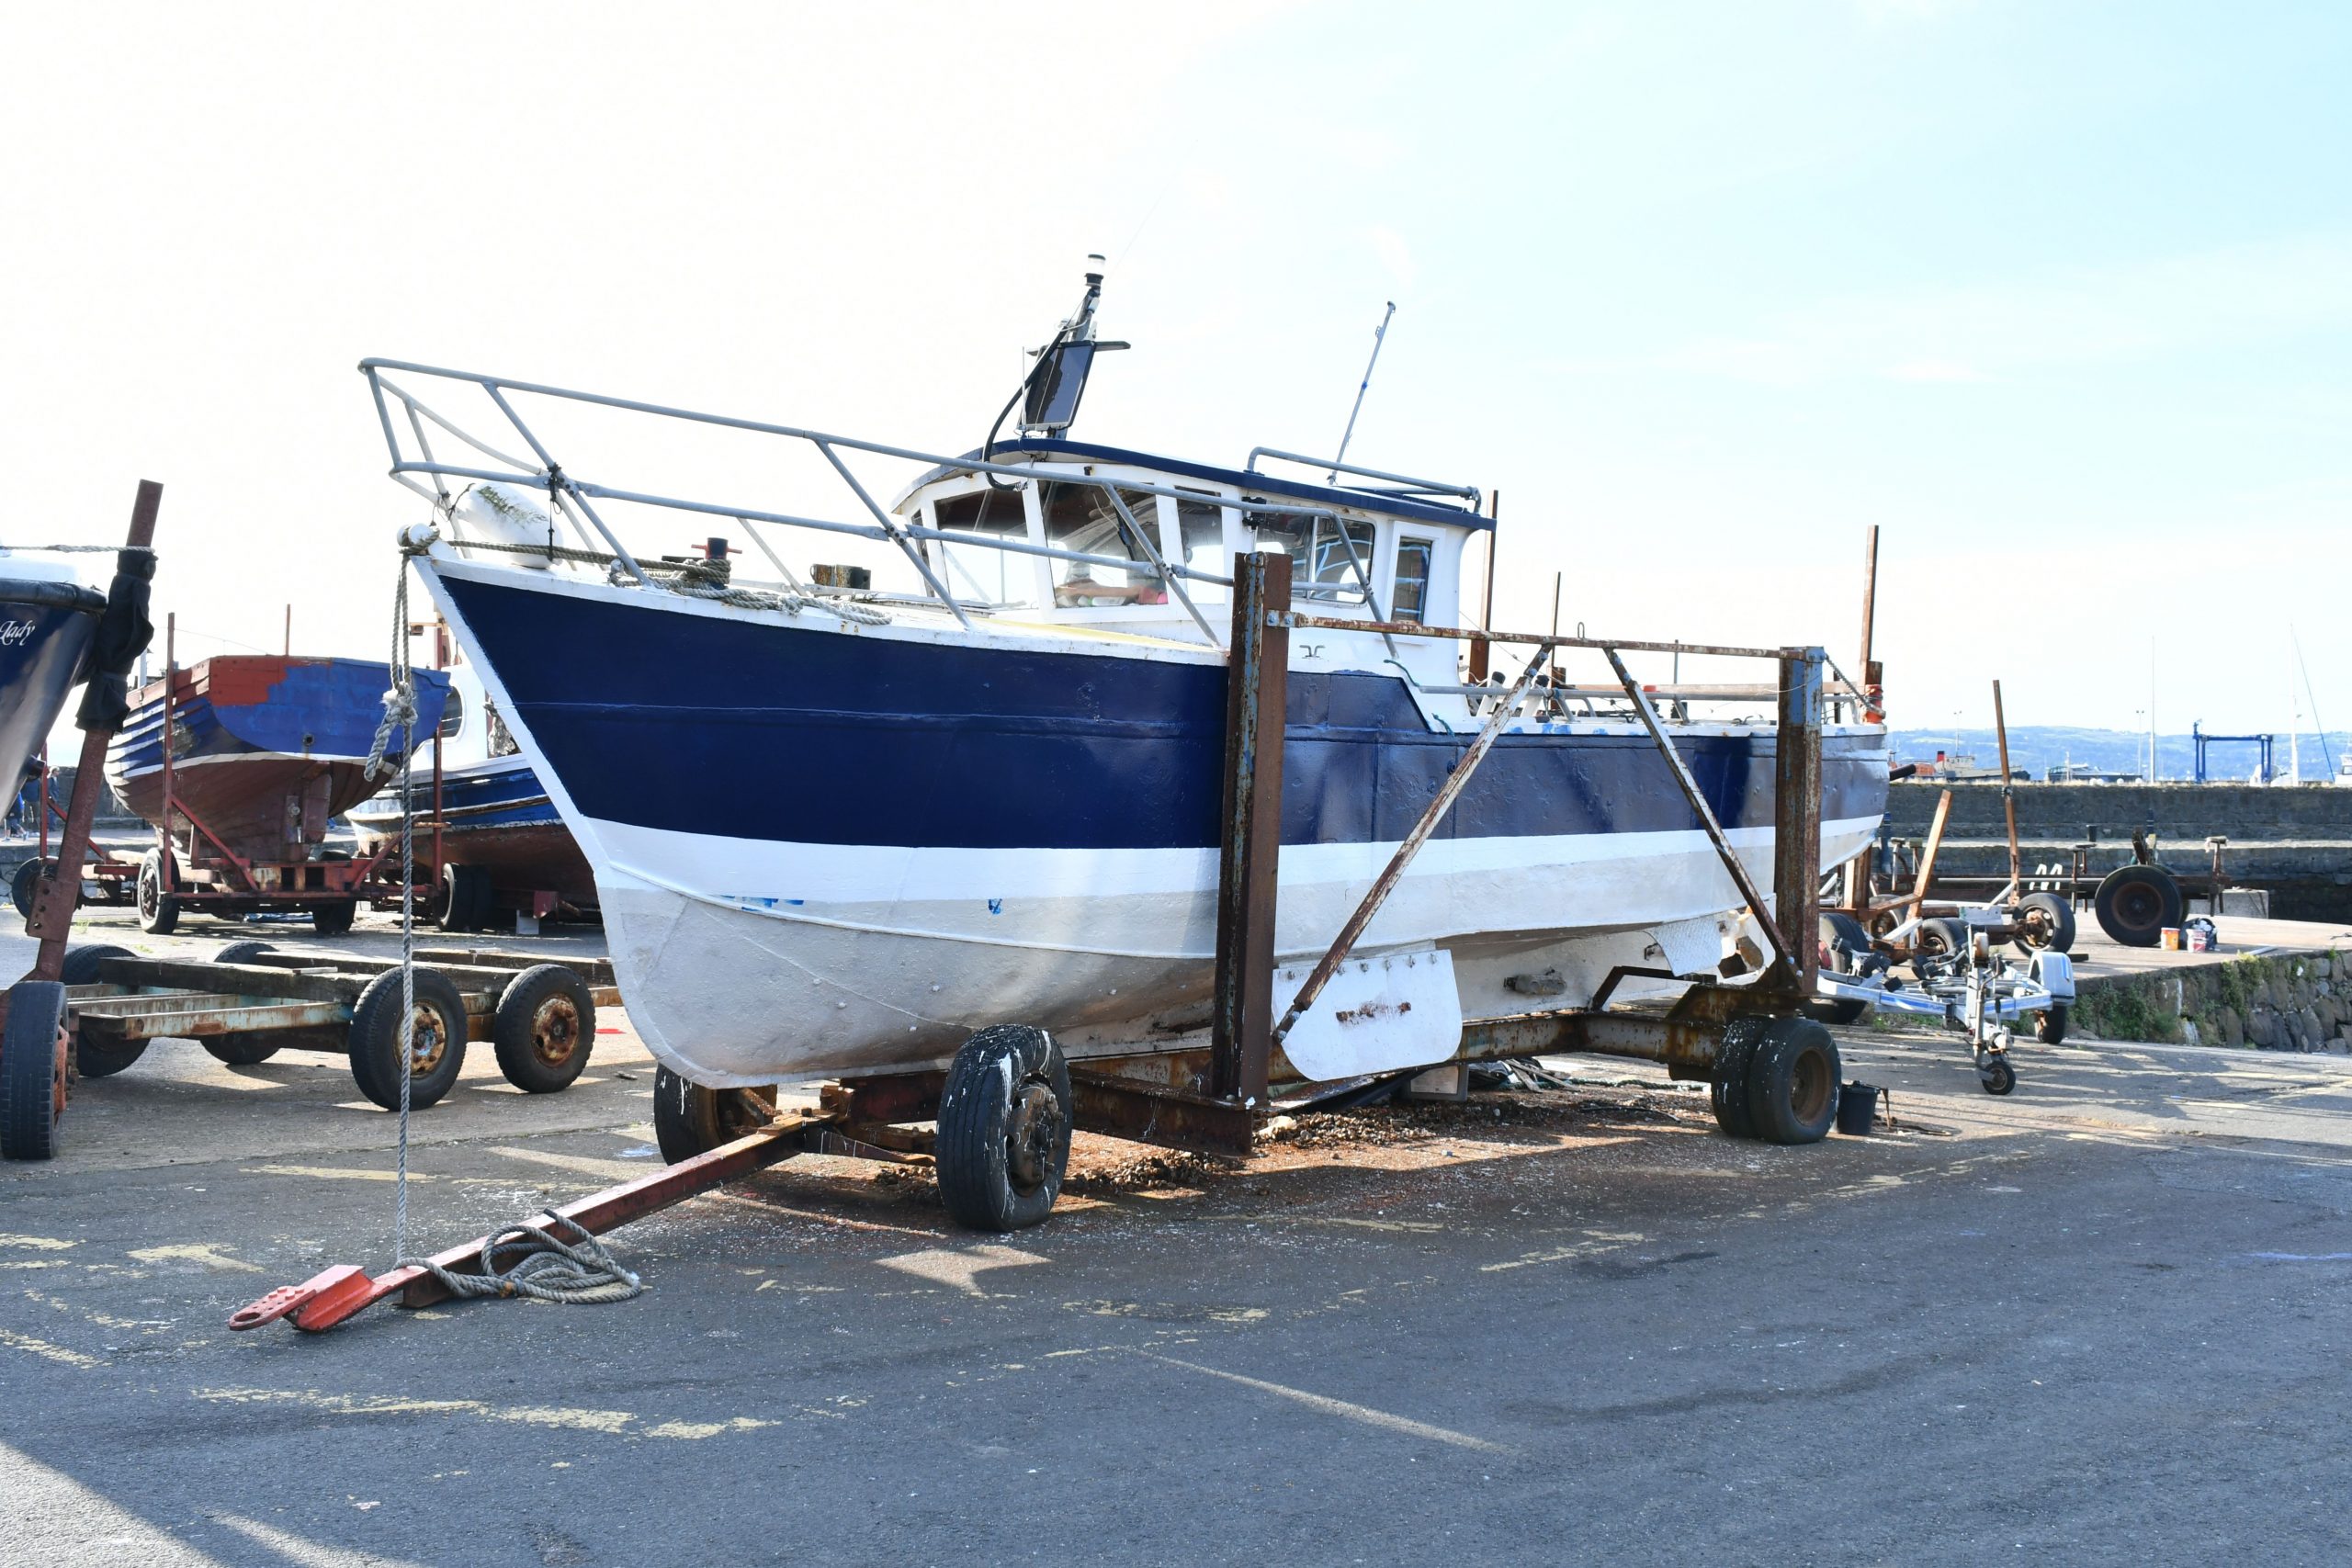 A small fishing boat out of the water awaiting repairs